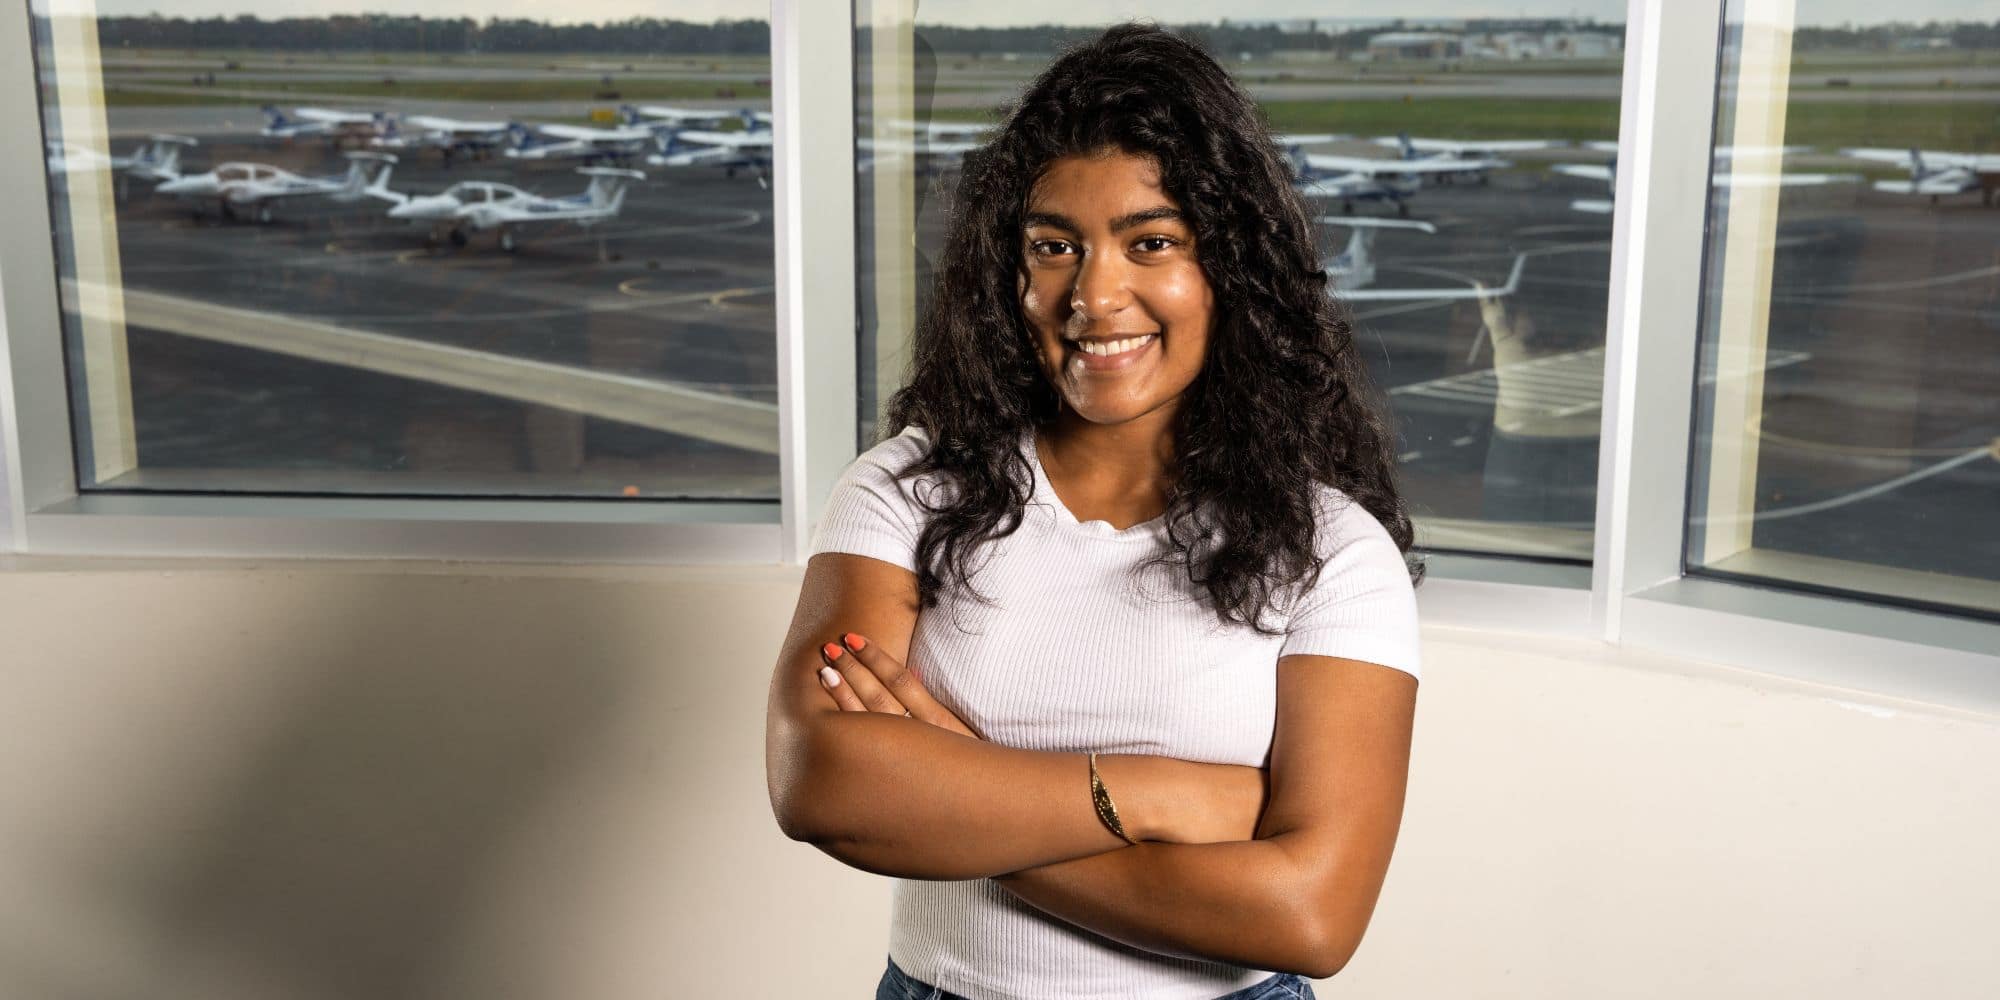 Boeing Scholar and Aeronautical Science major Kaylee Lall ('26) in Embry-Riddle's Flight building overlooking the ramp. (Photo: Embry-Riddle / Bill Fredette-Huffman)